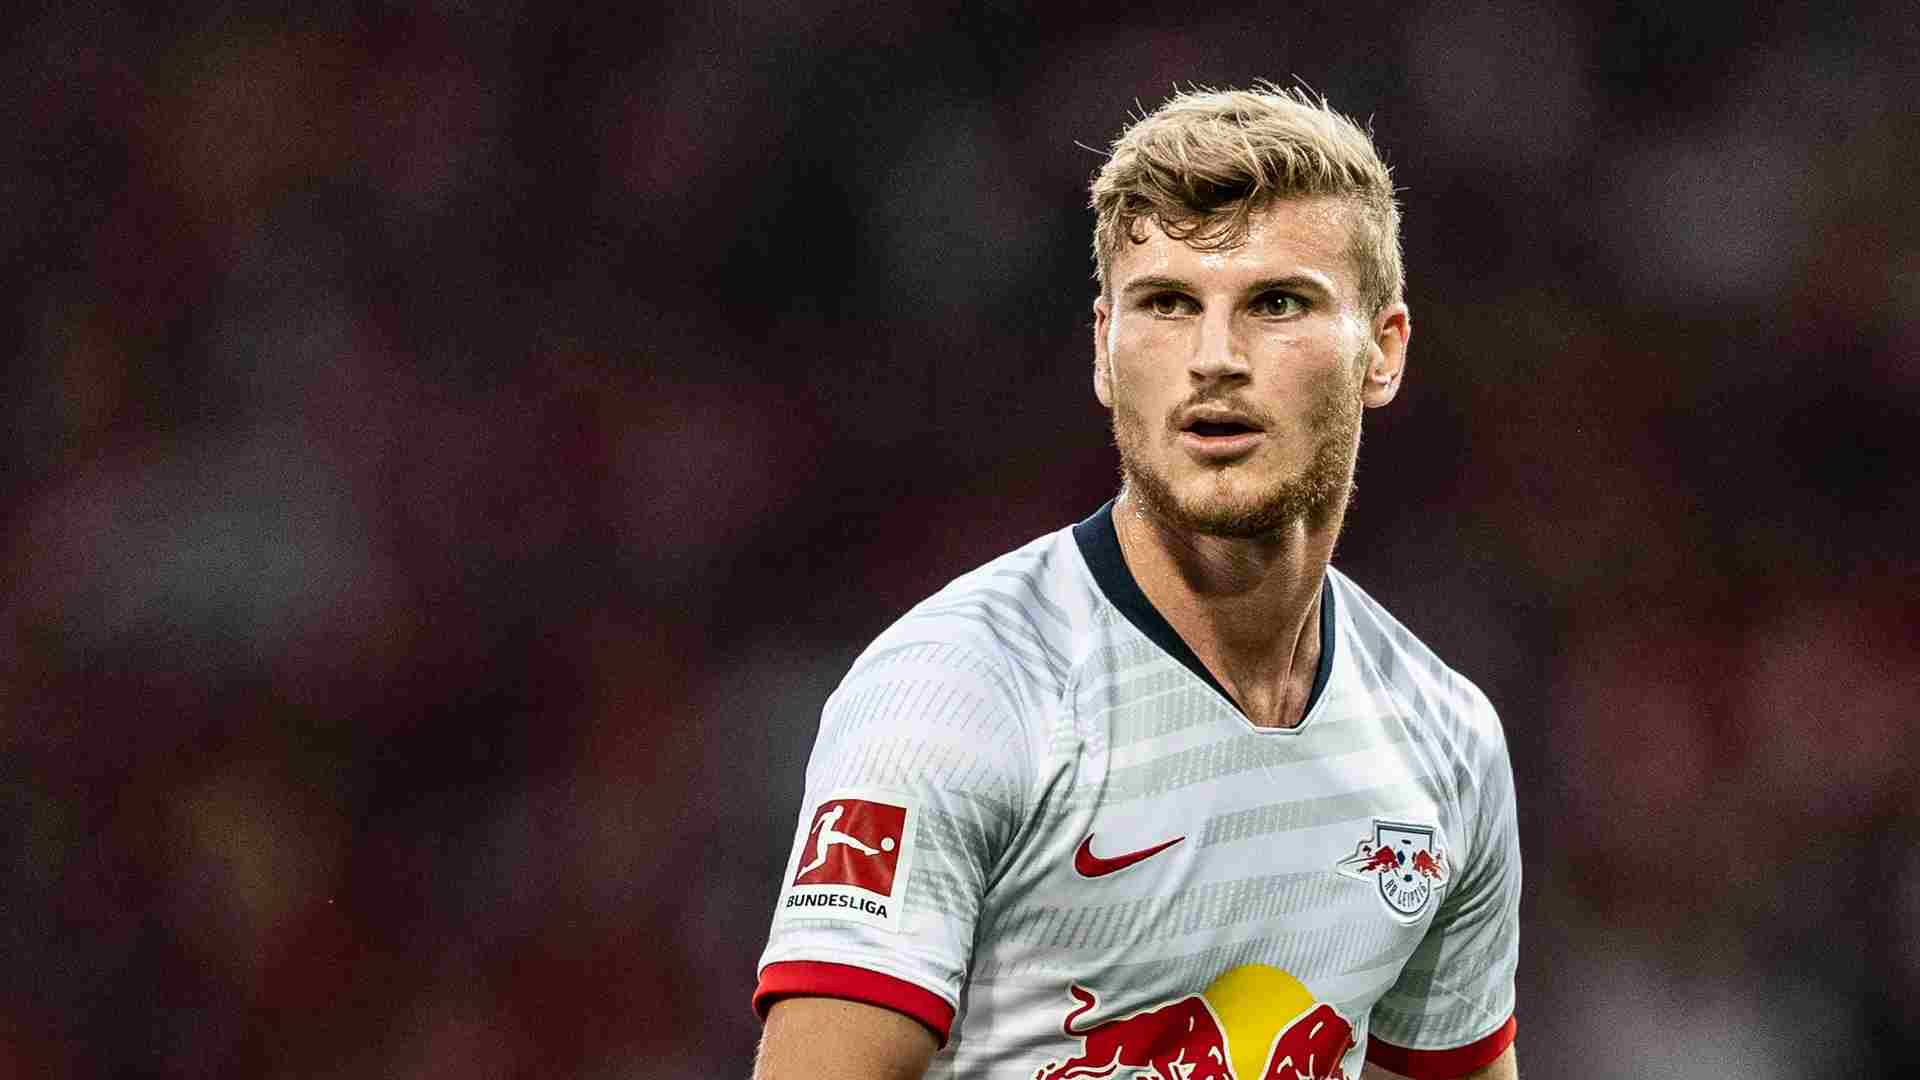 Timo Werner on United's radar for January transfer window